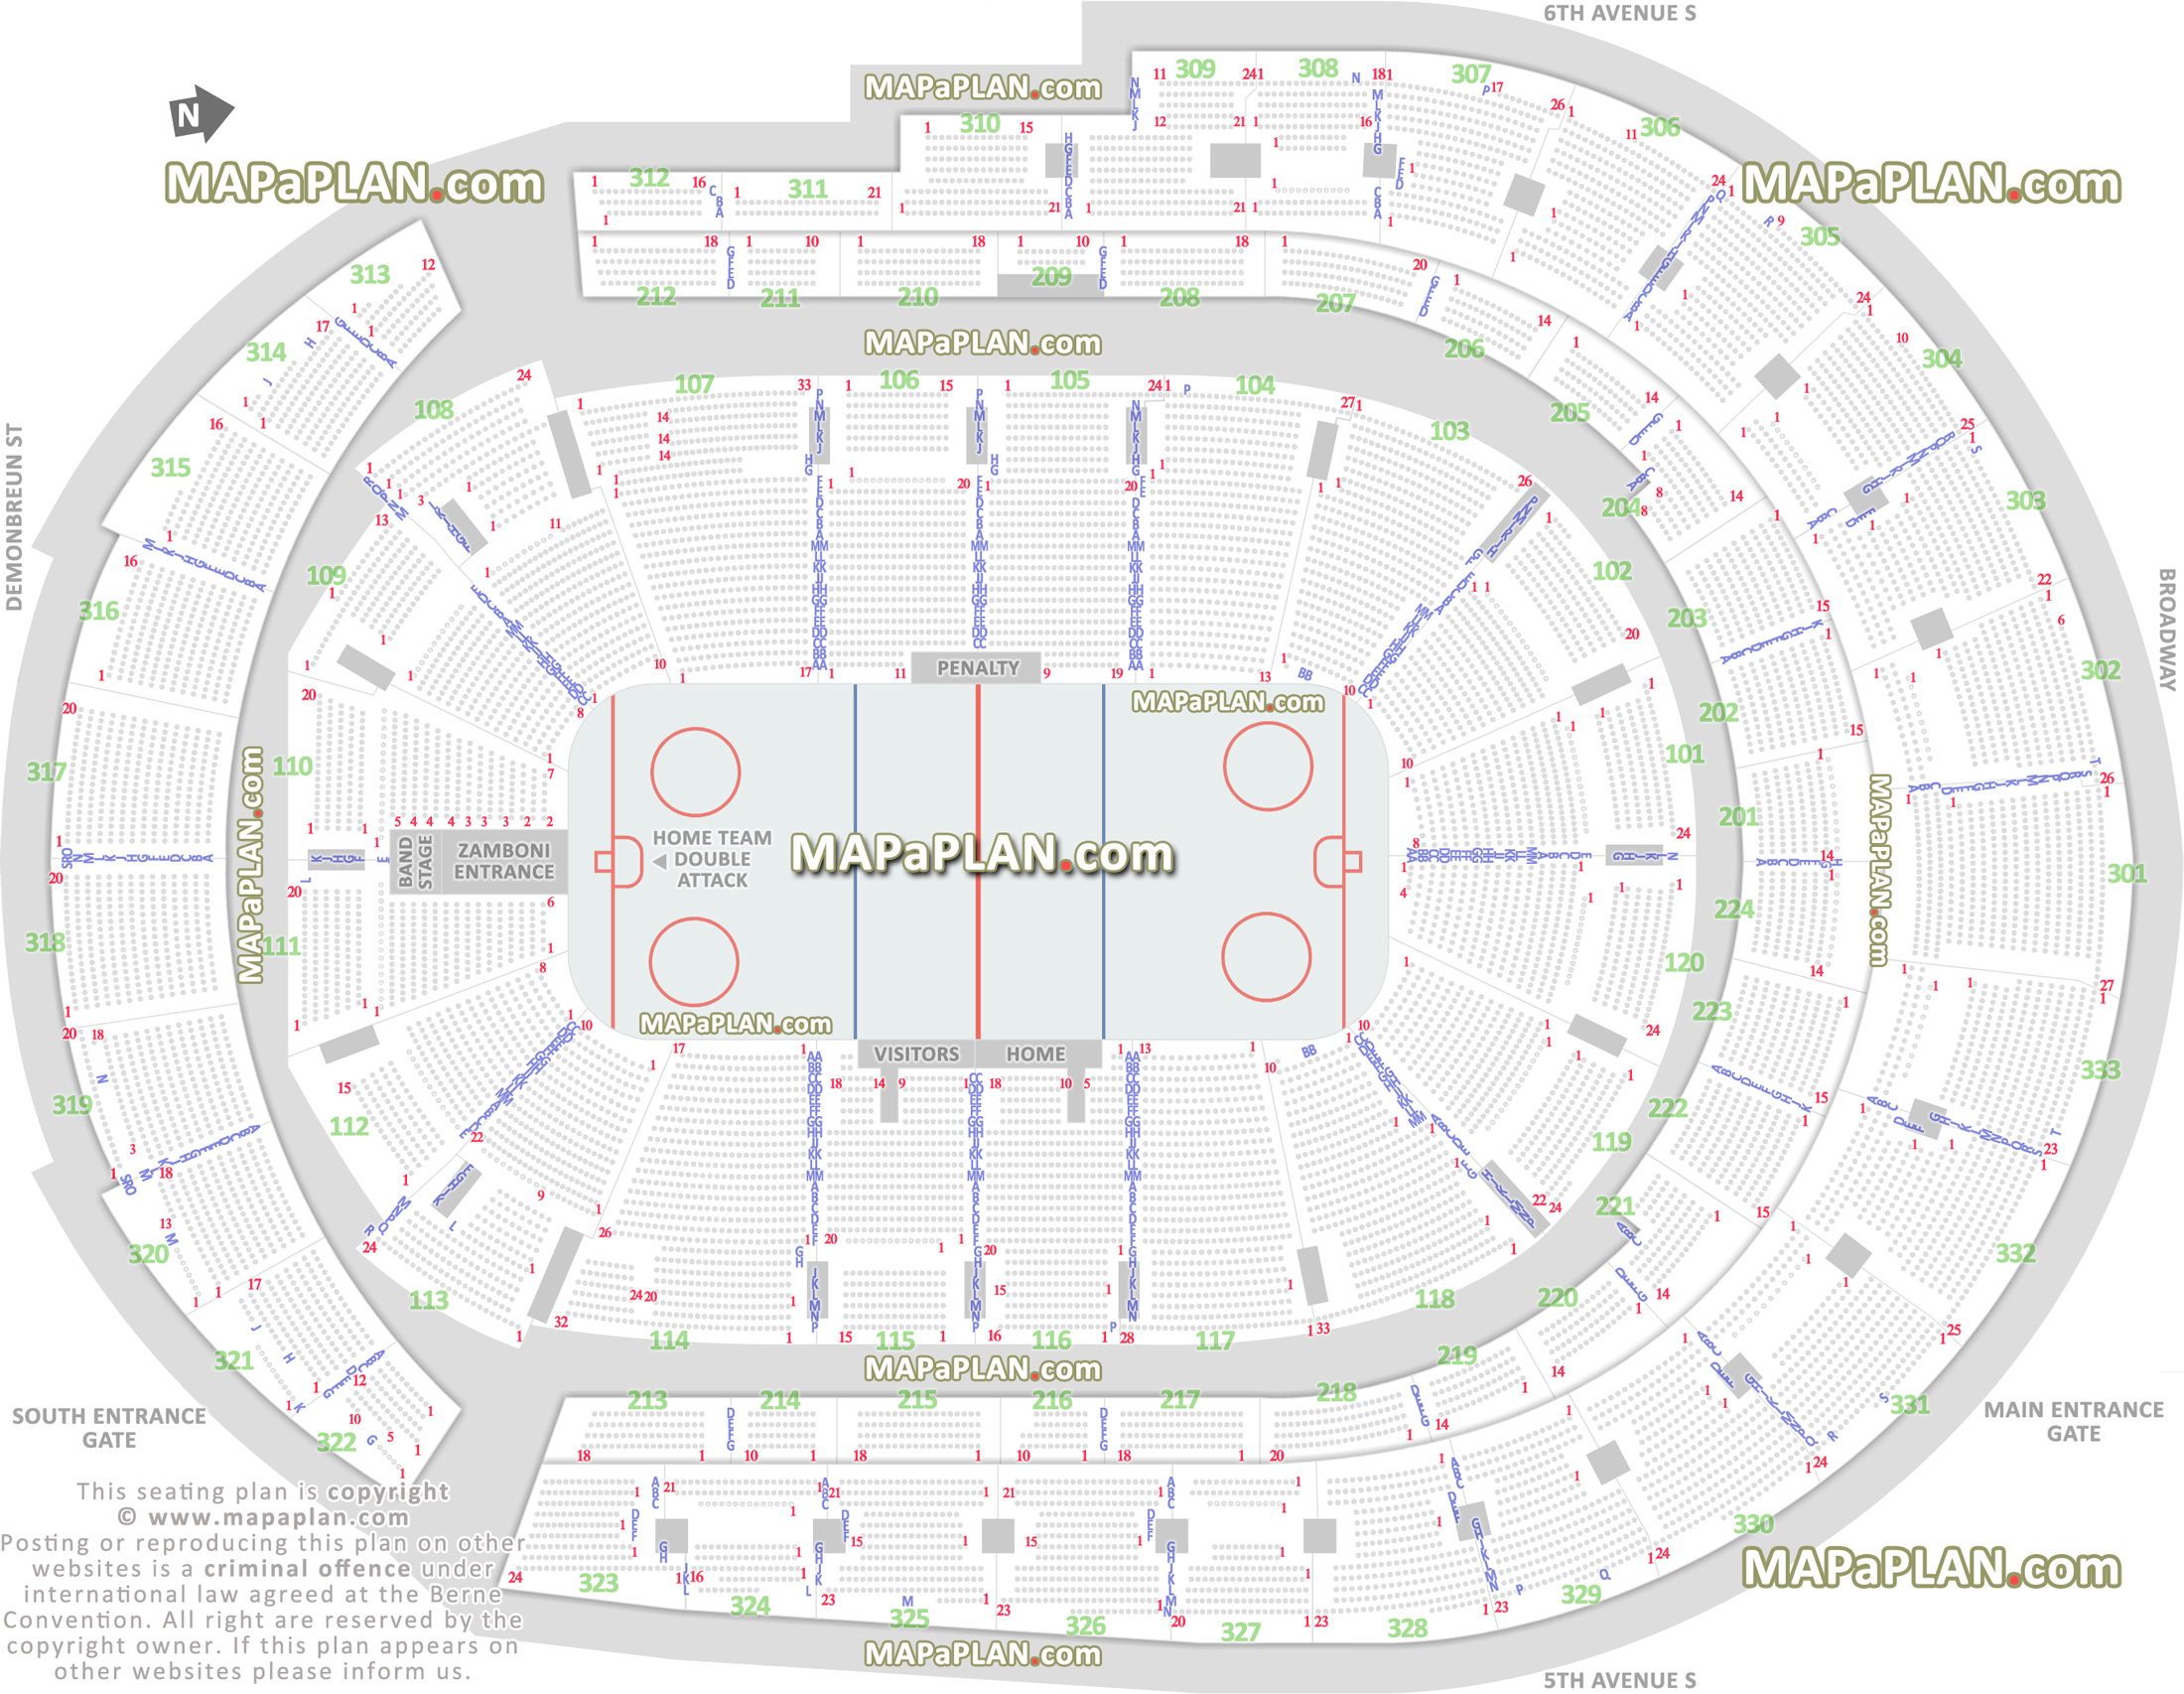 predators new nhl stadium ice hockey rink individual find my seat locator shoot once club penalty box home bench visitors double attack gary force acura level 200 Nashville Bridgestone Arena seating chart